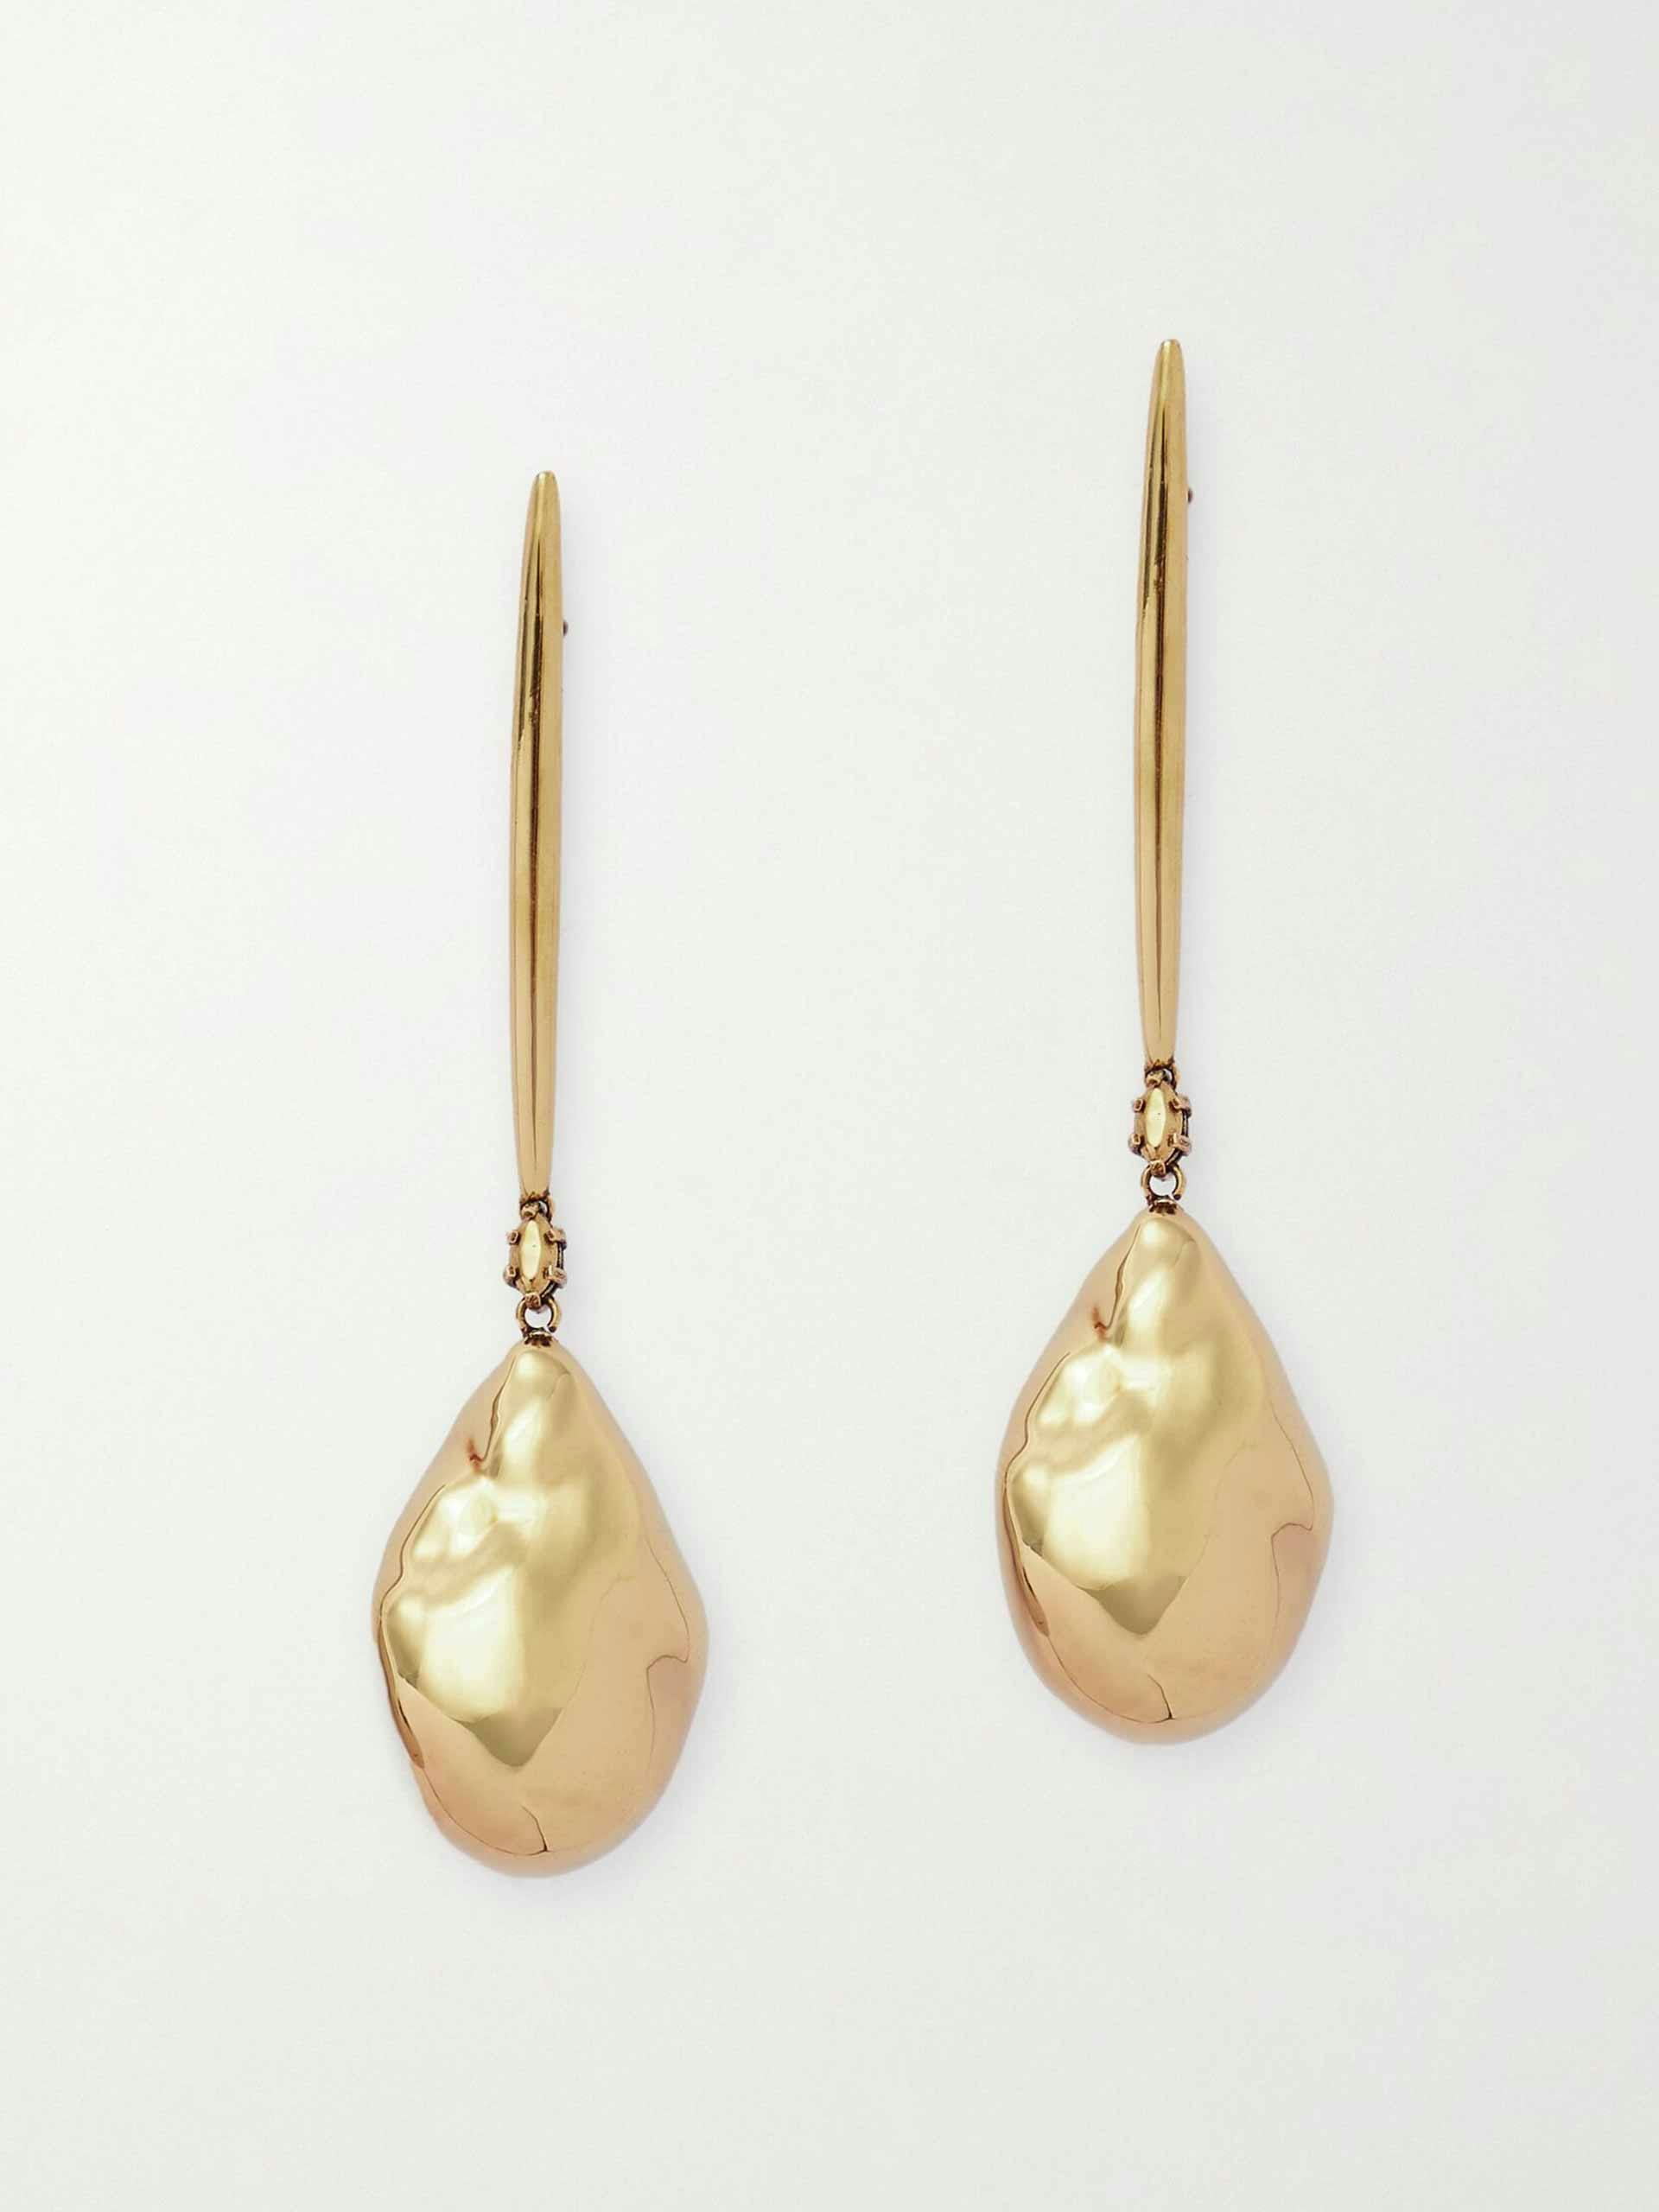 Gold and silver-tone earrings